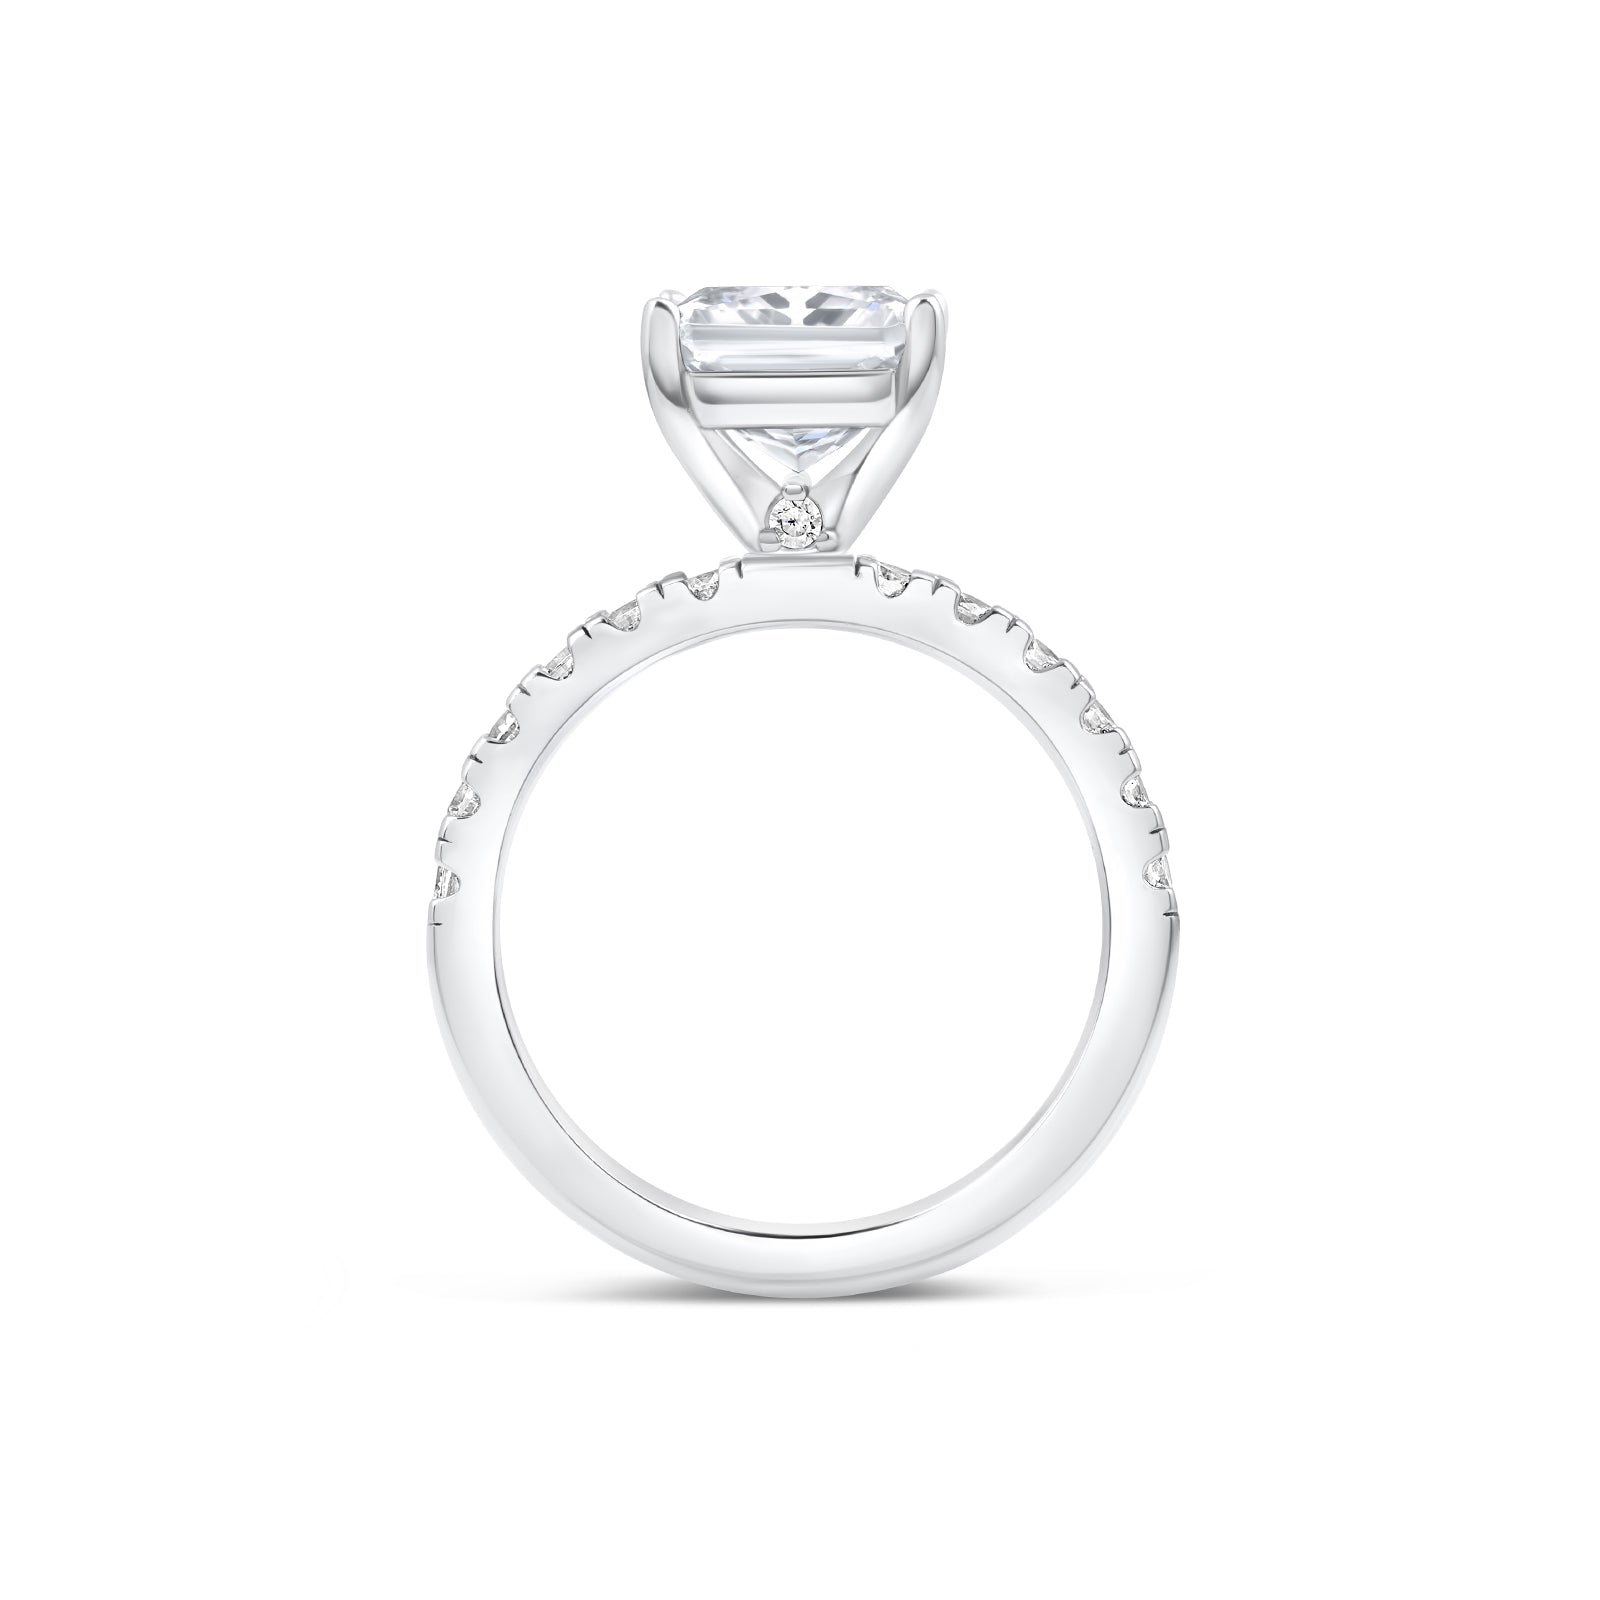 Band view of sleek silver radiant cut engagement ring with dainty stone detailing under its setting and a half eternity band